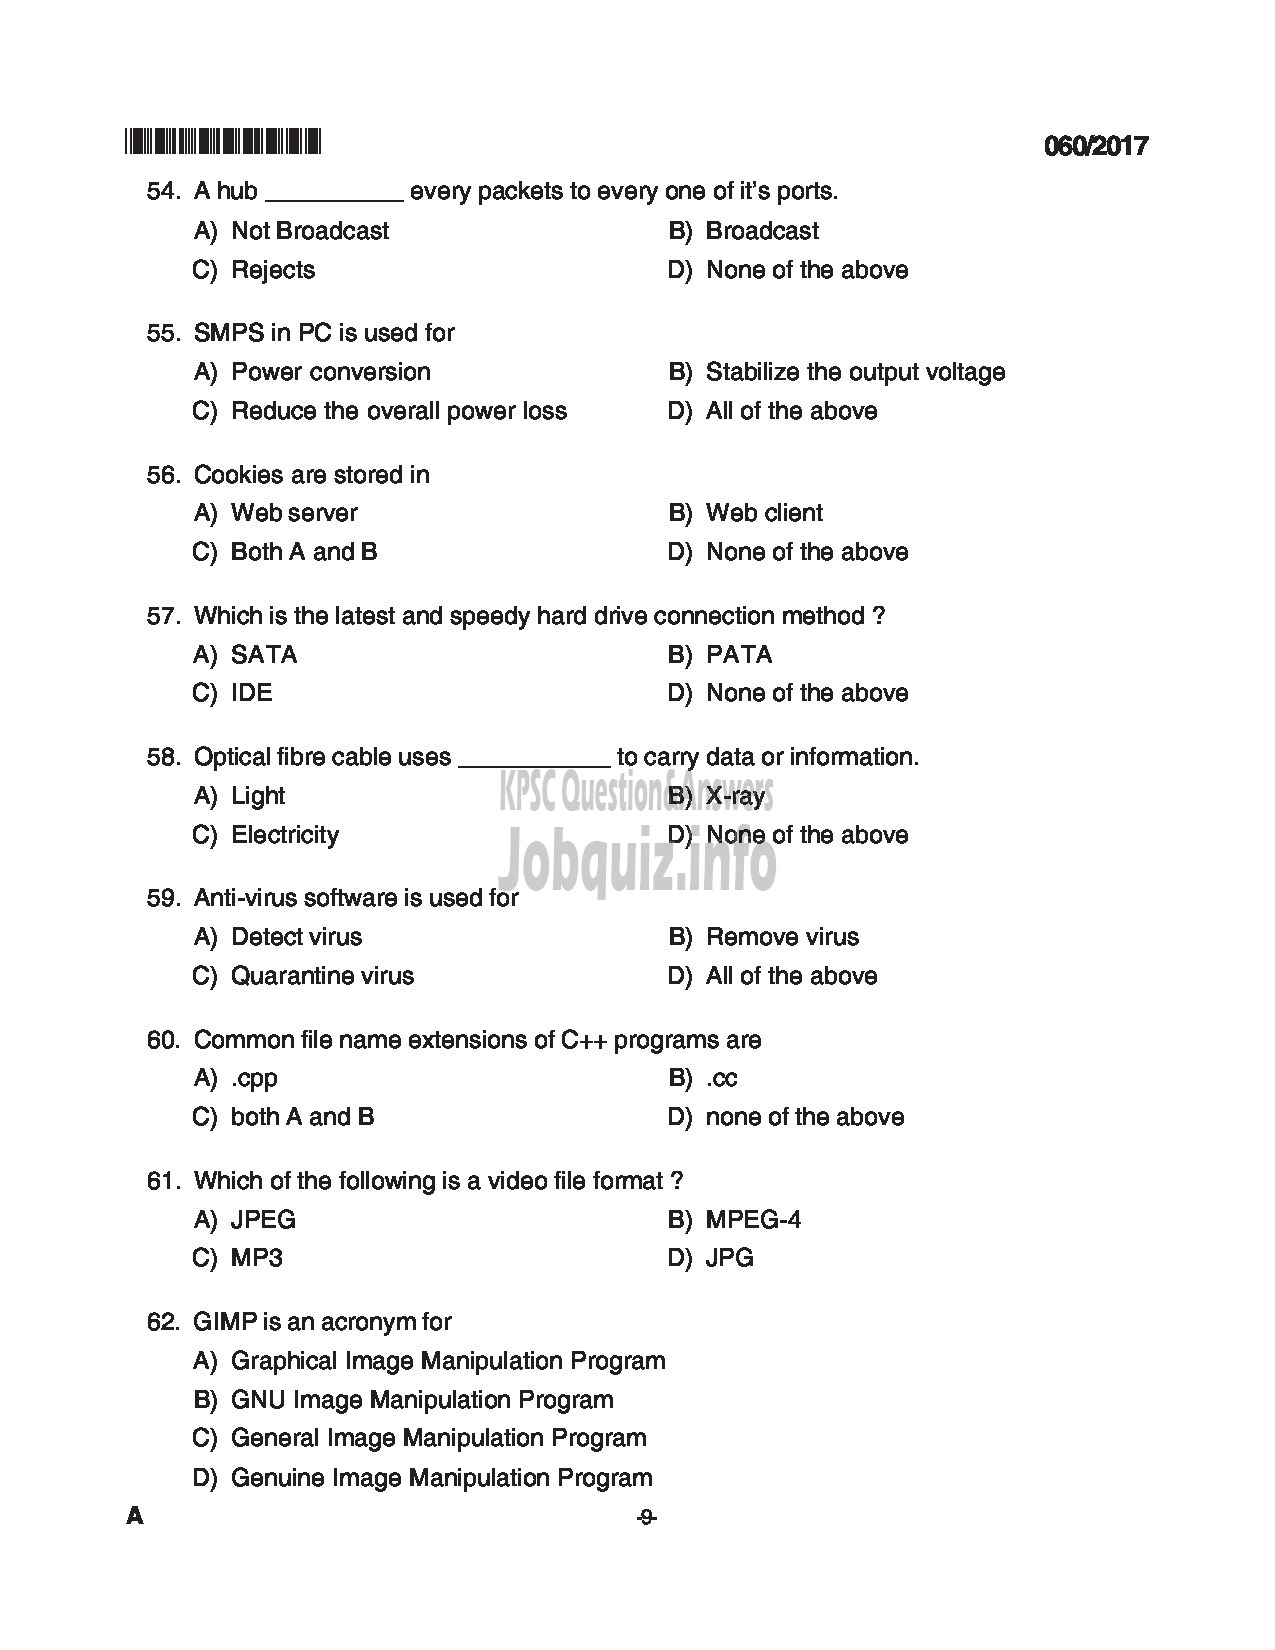 Kerala PSC Question Paper - TRADESMAN COMPUTER ENGINEERING TECHNICAL EDUCATION QUESTION PAPER-9